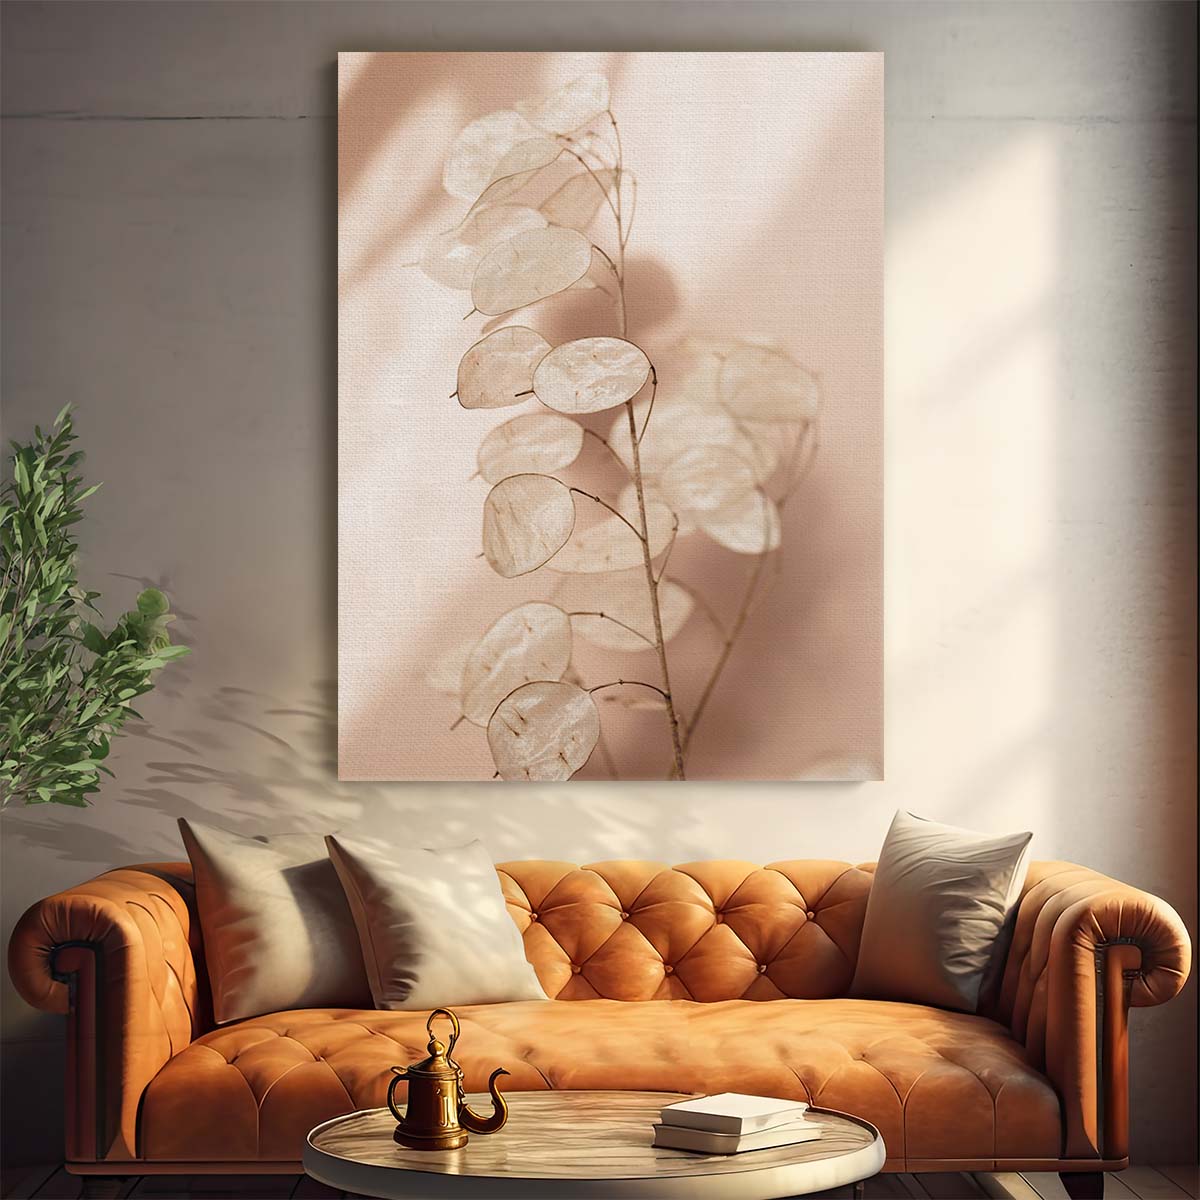 Boho Pastel Beige Floral Photography by Mareike Bohmer by Luxuriance Designs, made in USA